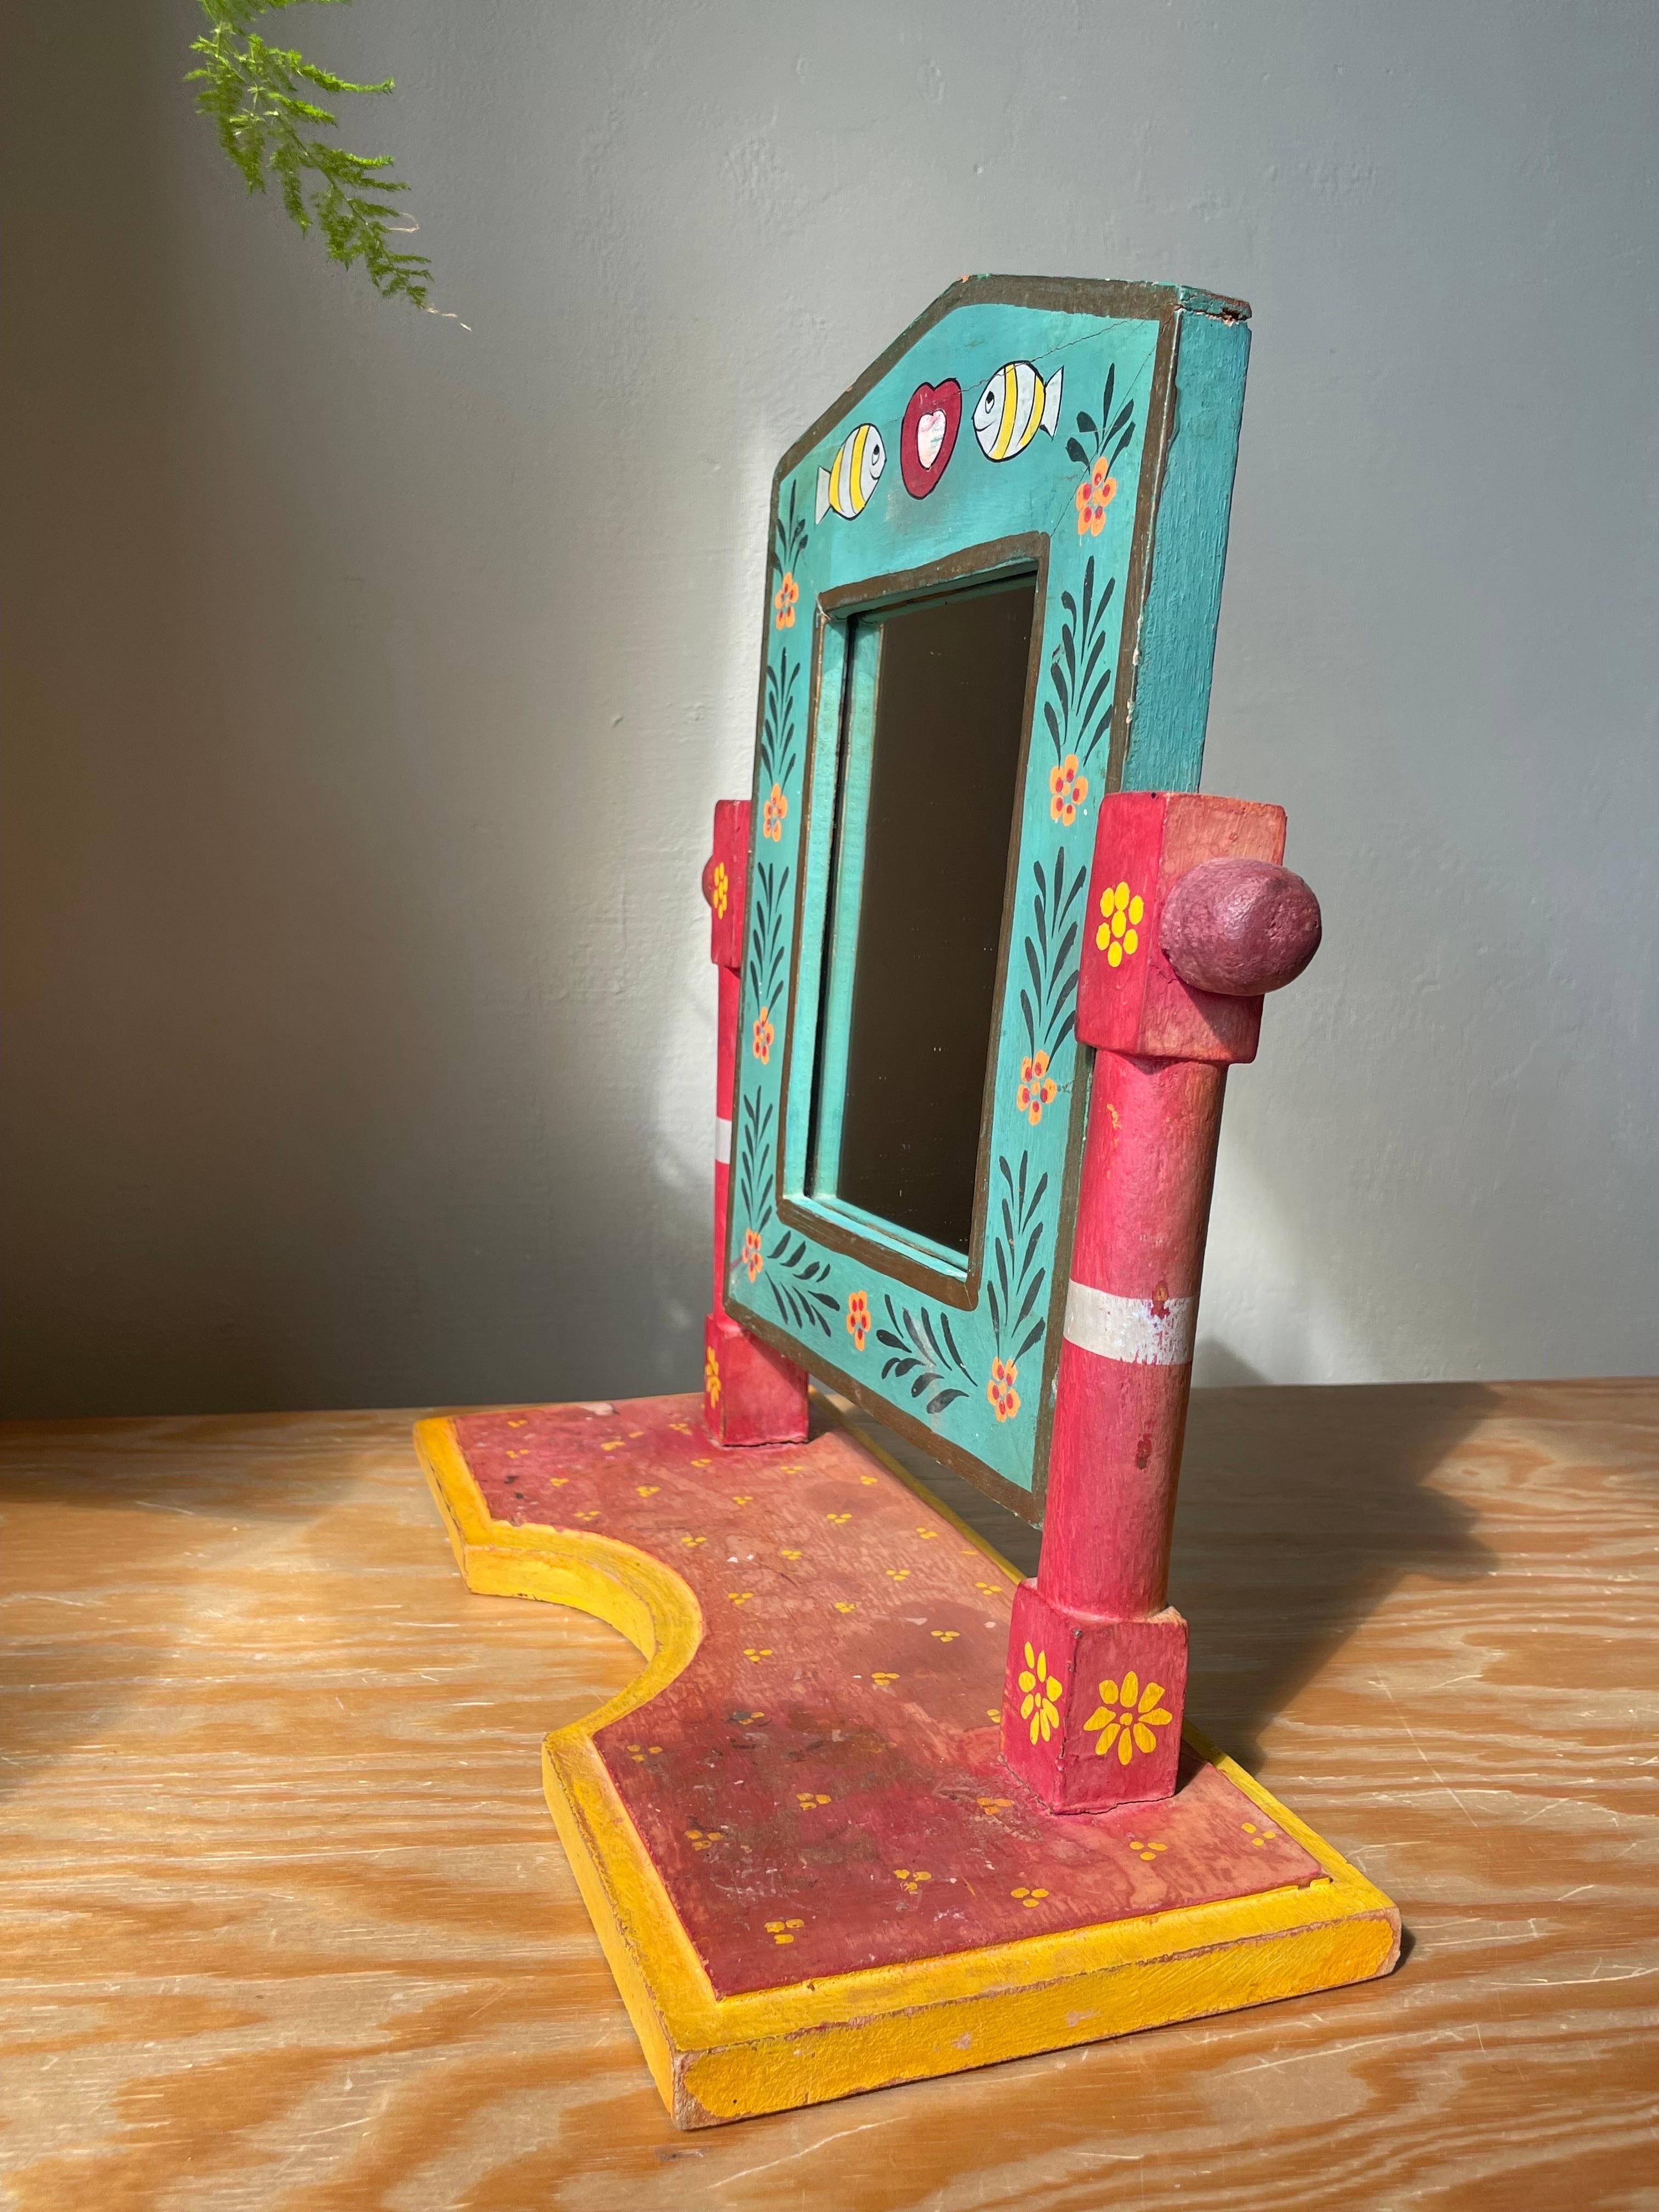 Handmade multicolored wooden Swedish allmoga folk art boho style table mirror. Handpainted floral, organic and simple decorations in red, coral, orange, yellow, light blue, green, gold and white. Great vintage condition. 
Sweden, circa 1970s.